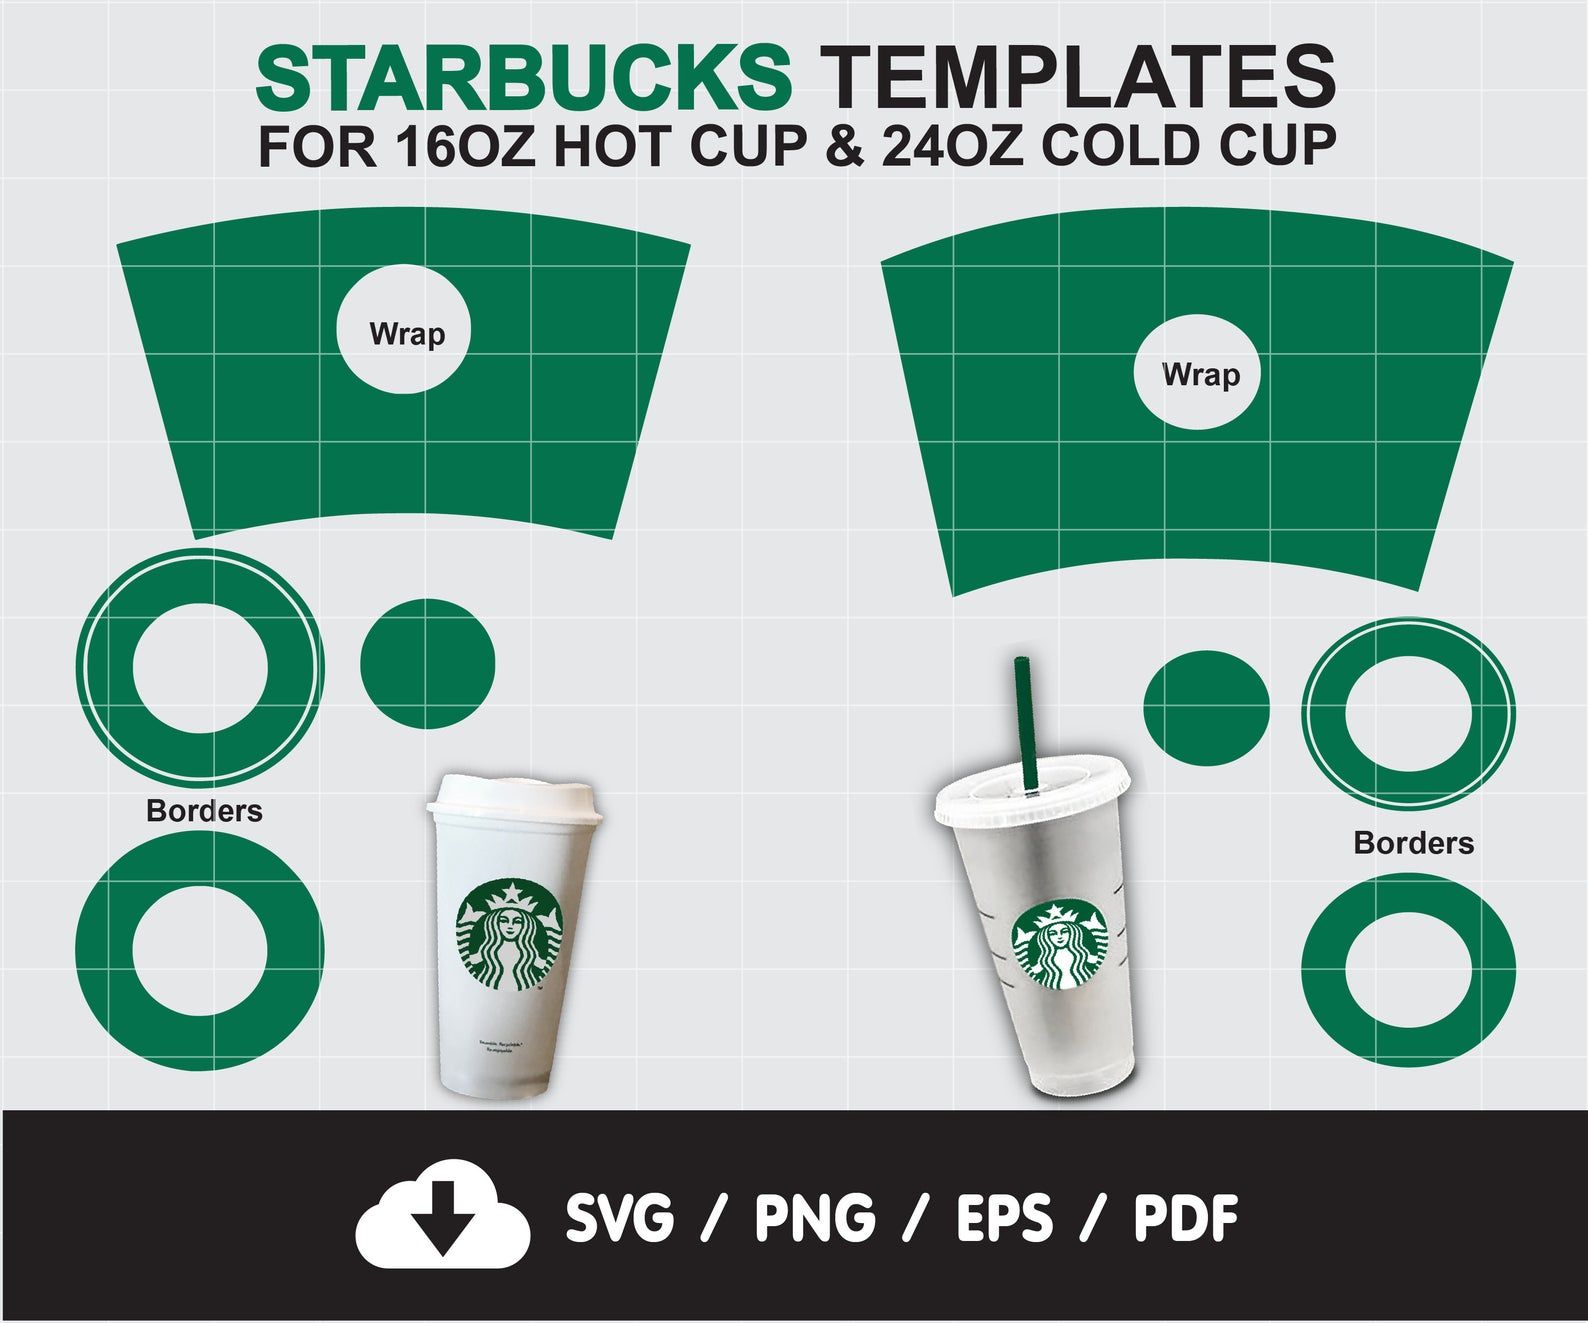 What size is the Starbucks logo on a tumbler? - Foodly